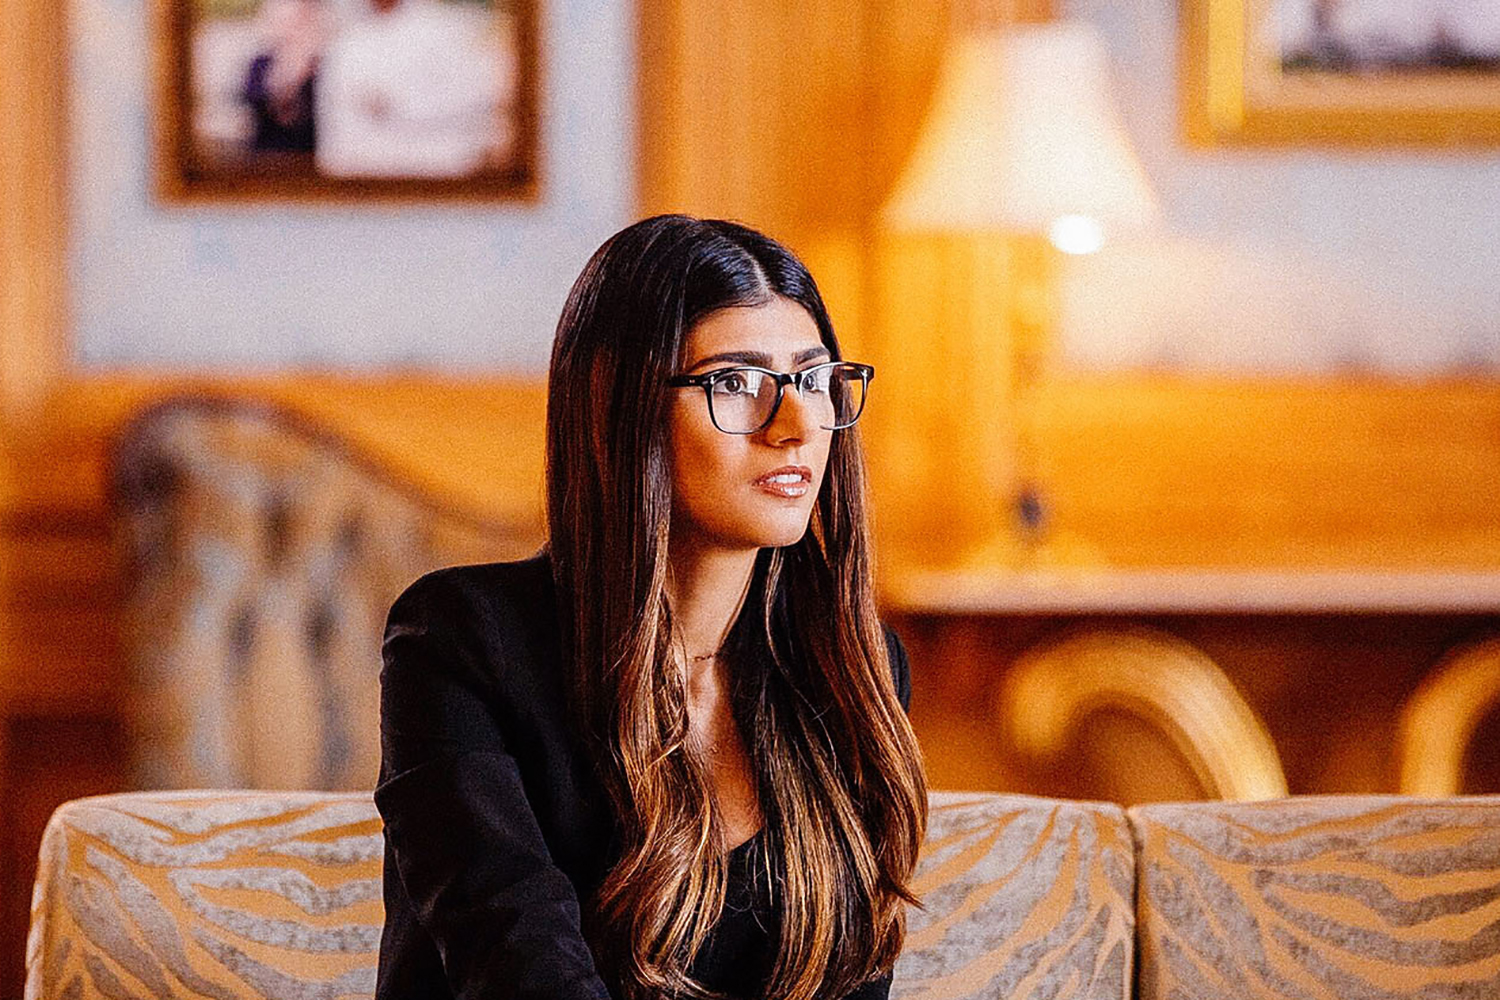 Mia Khalifa OnlyFans And The Politics Of Ethical Porn InsideHook